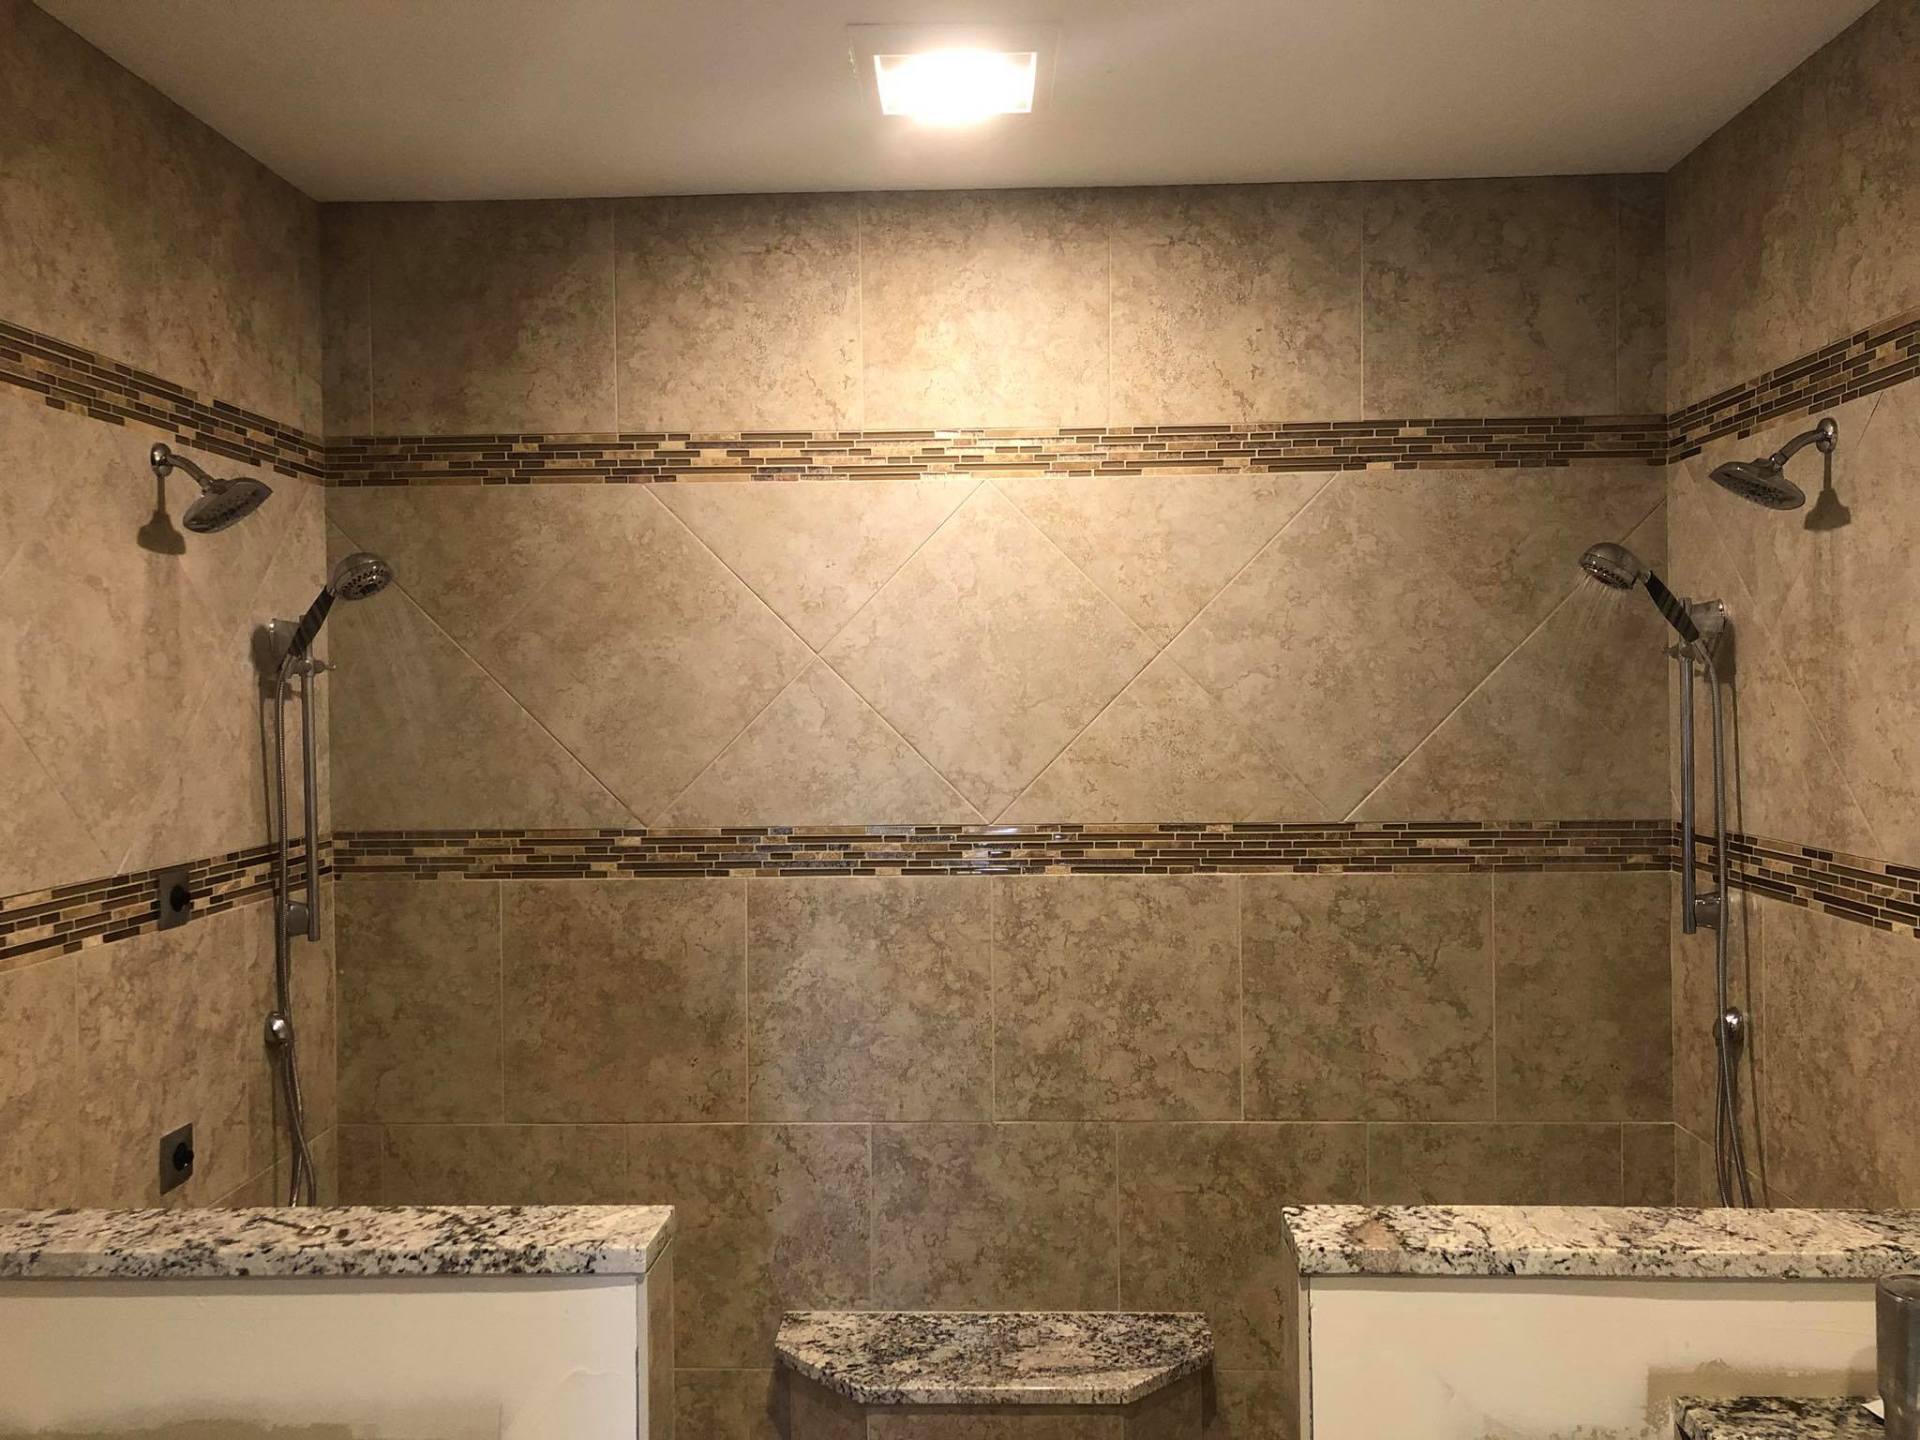 Water Service Installation And Repair — Elegant Shower Room in Decatur, IL